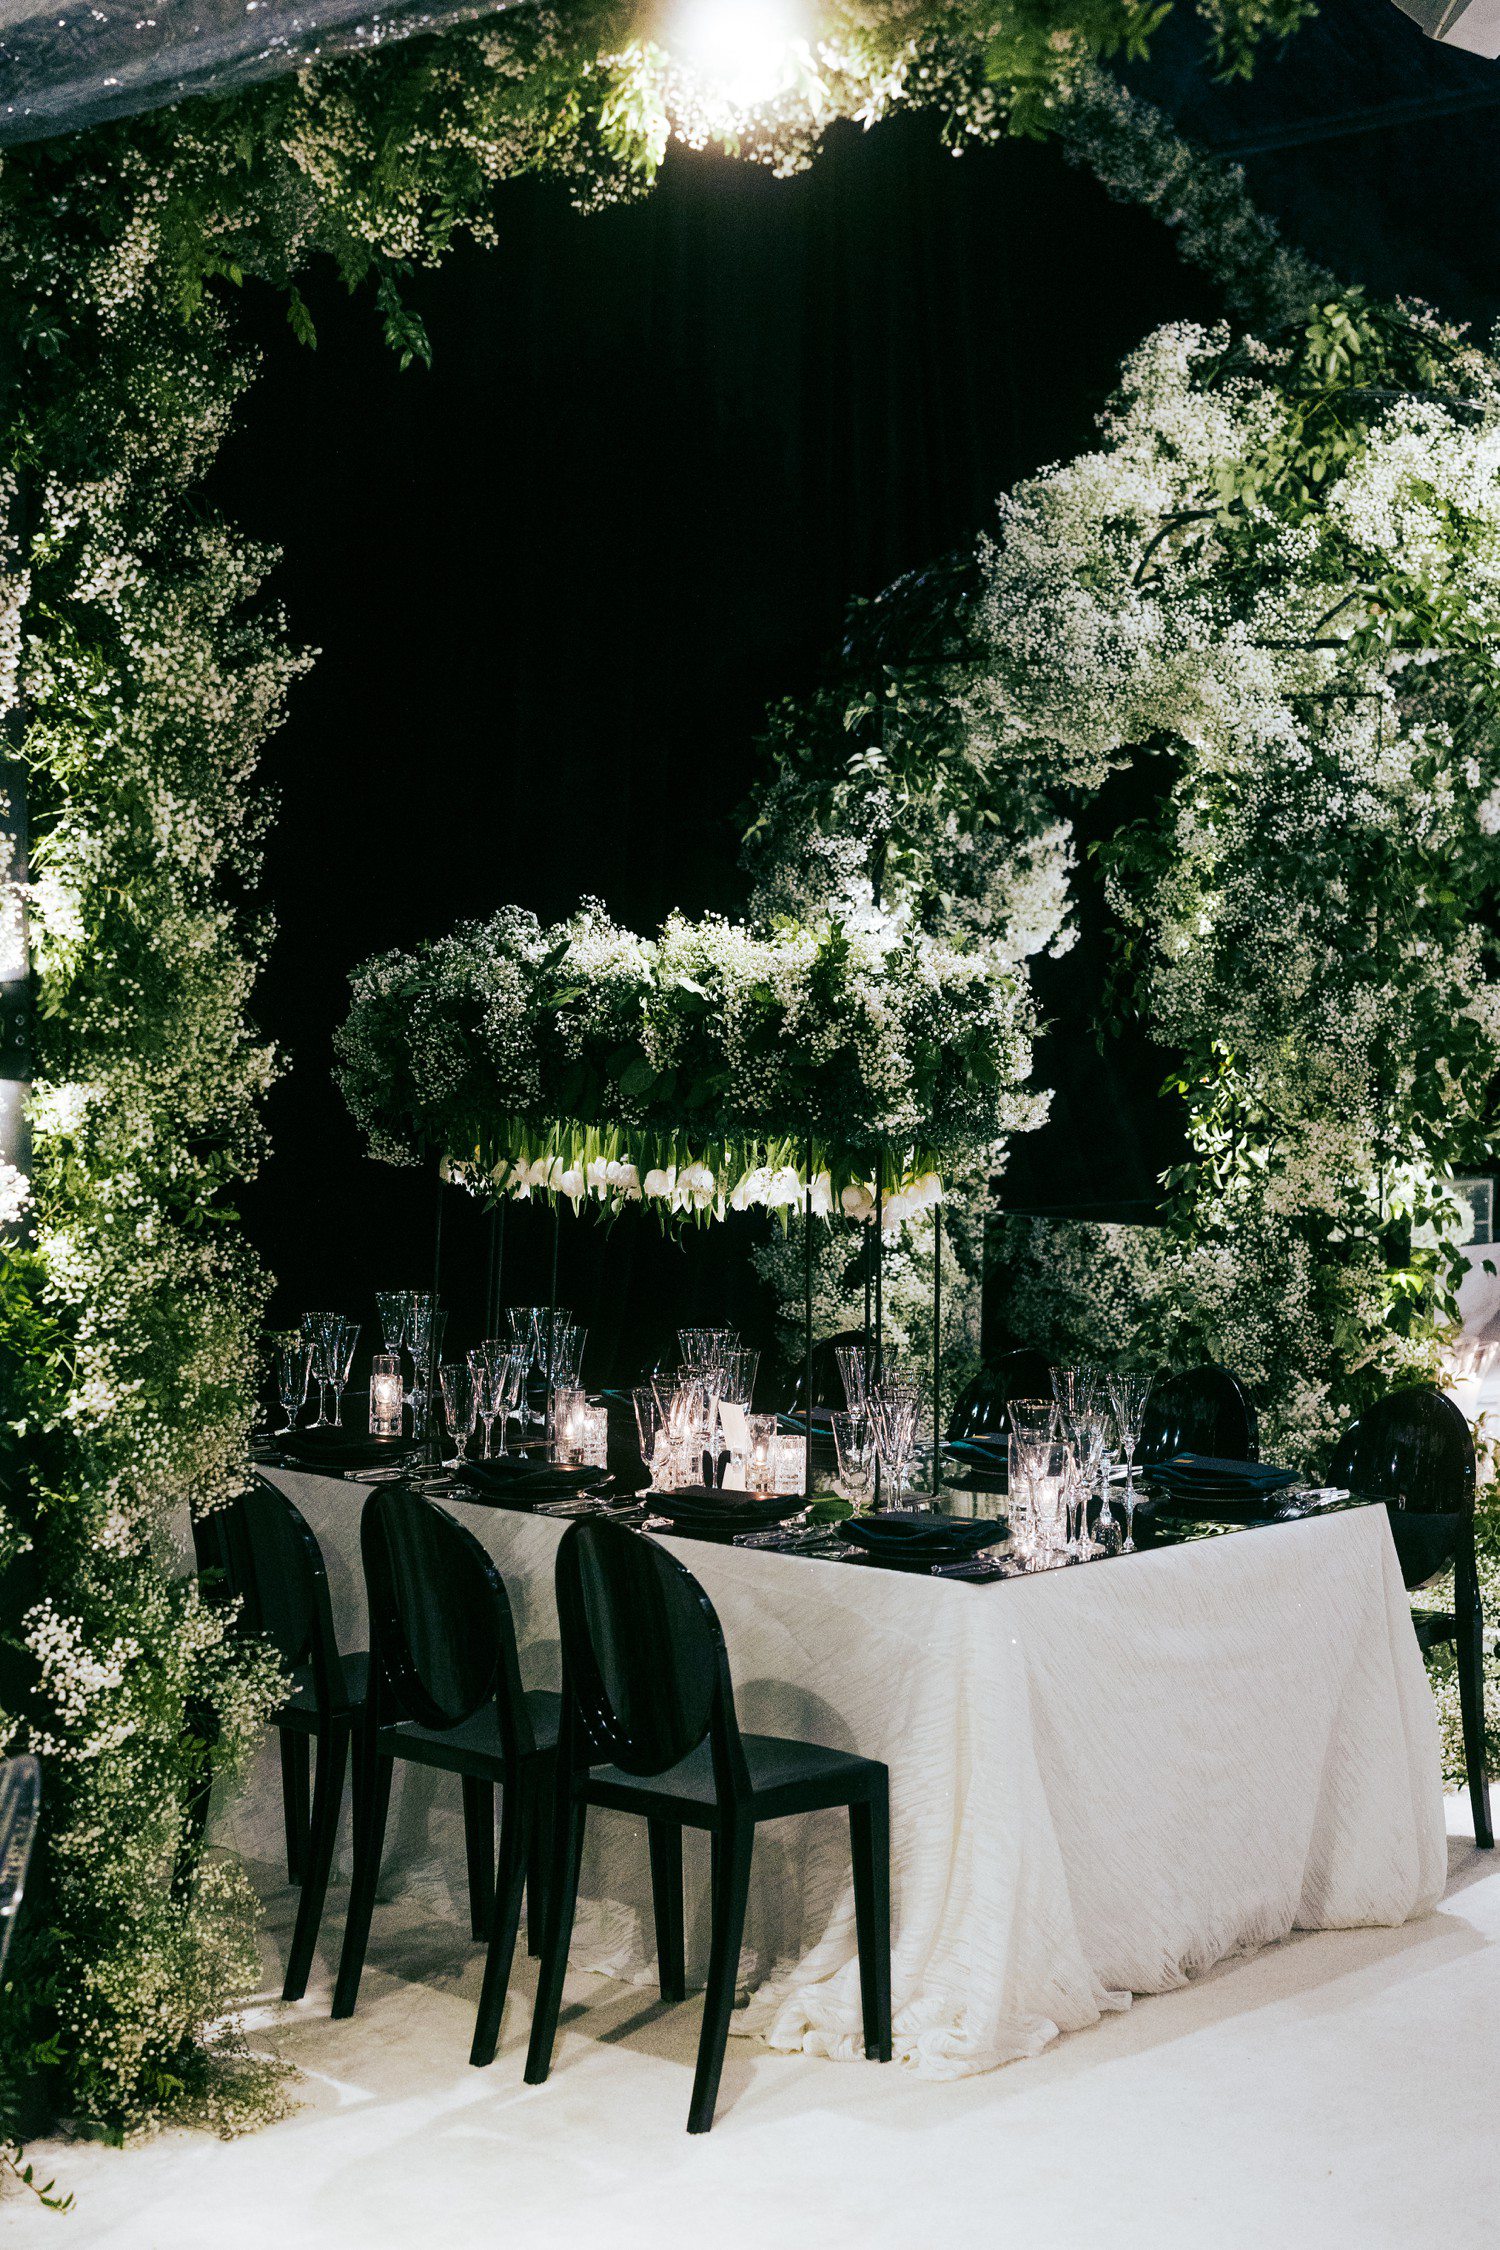 Black and White Wedding Reception with Baby's Breath